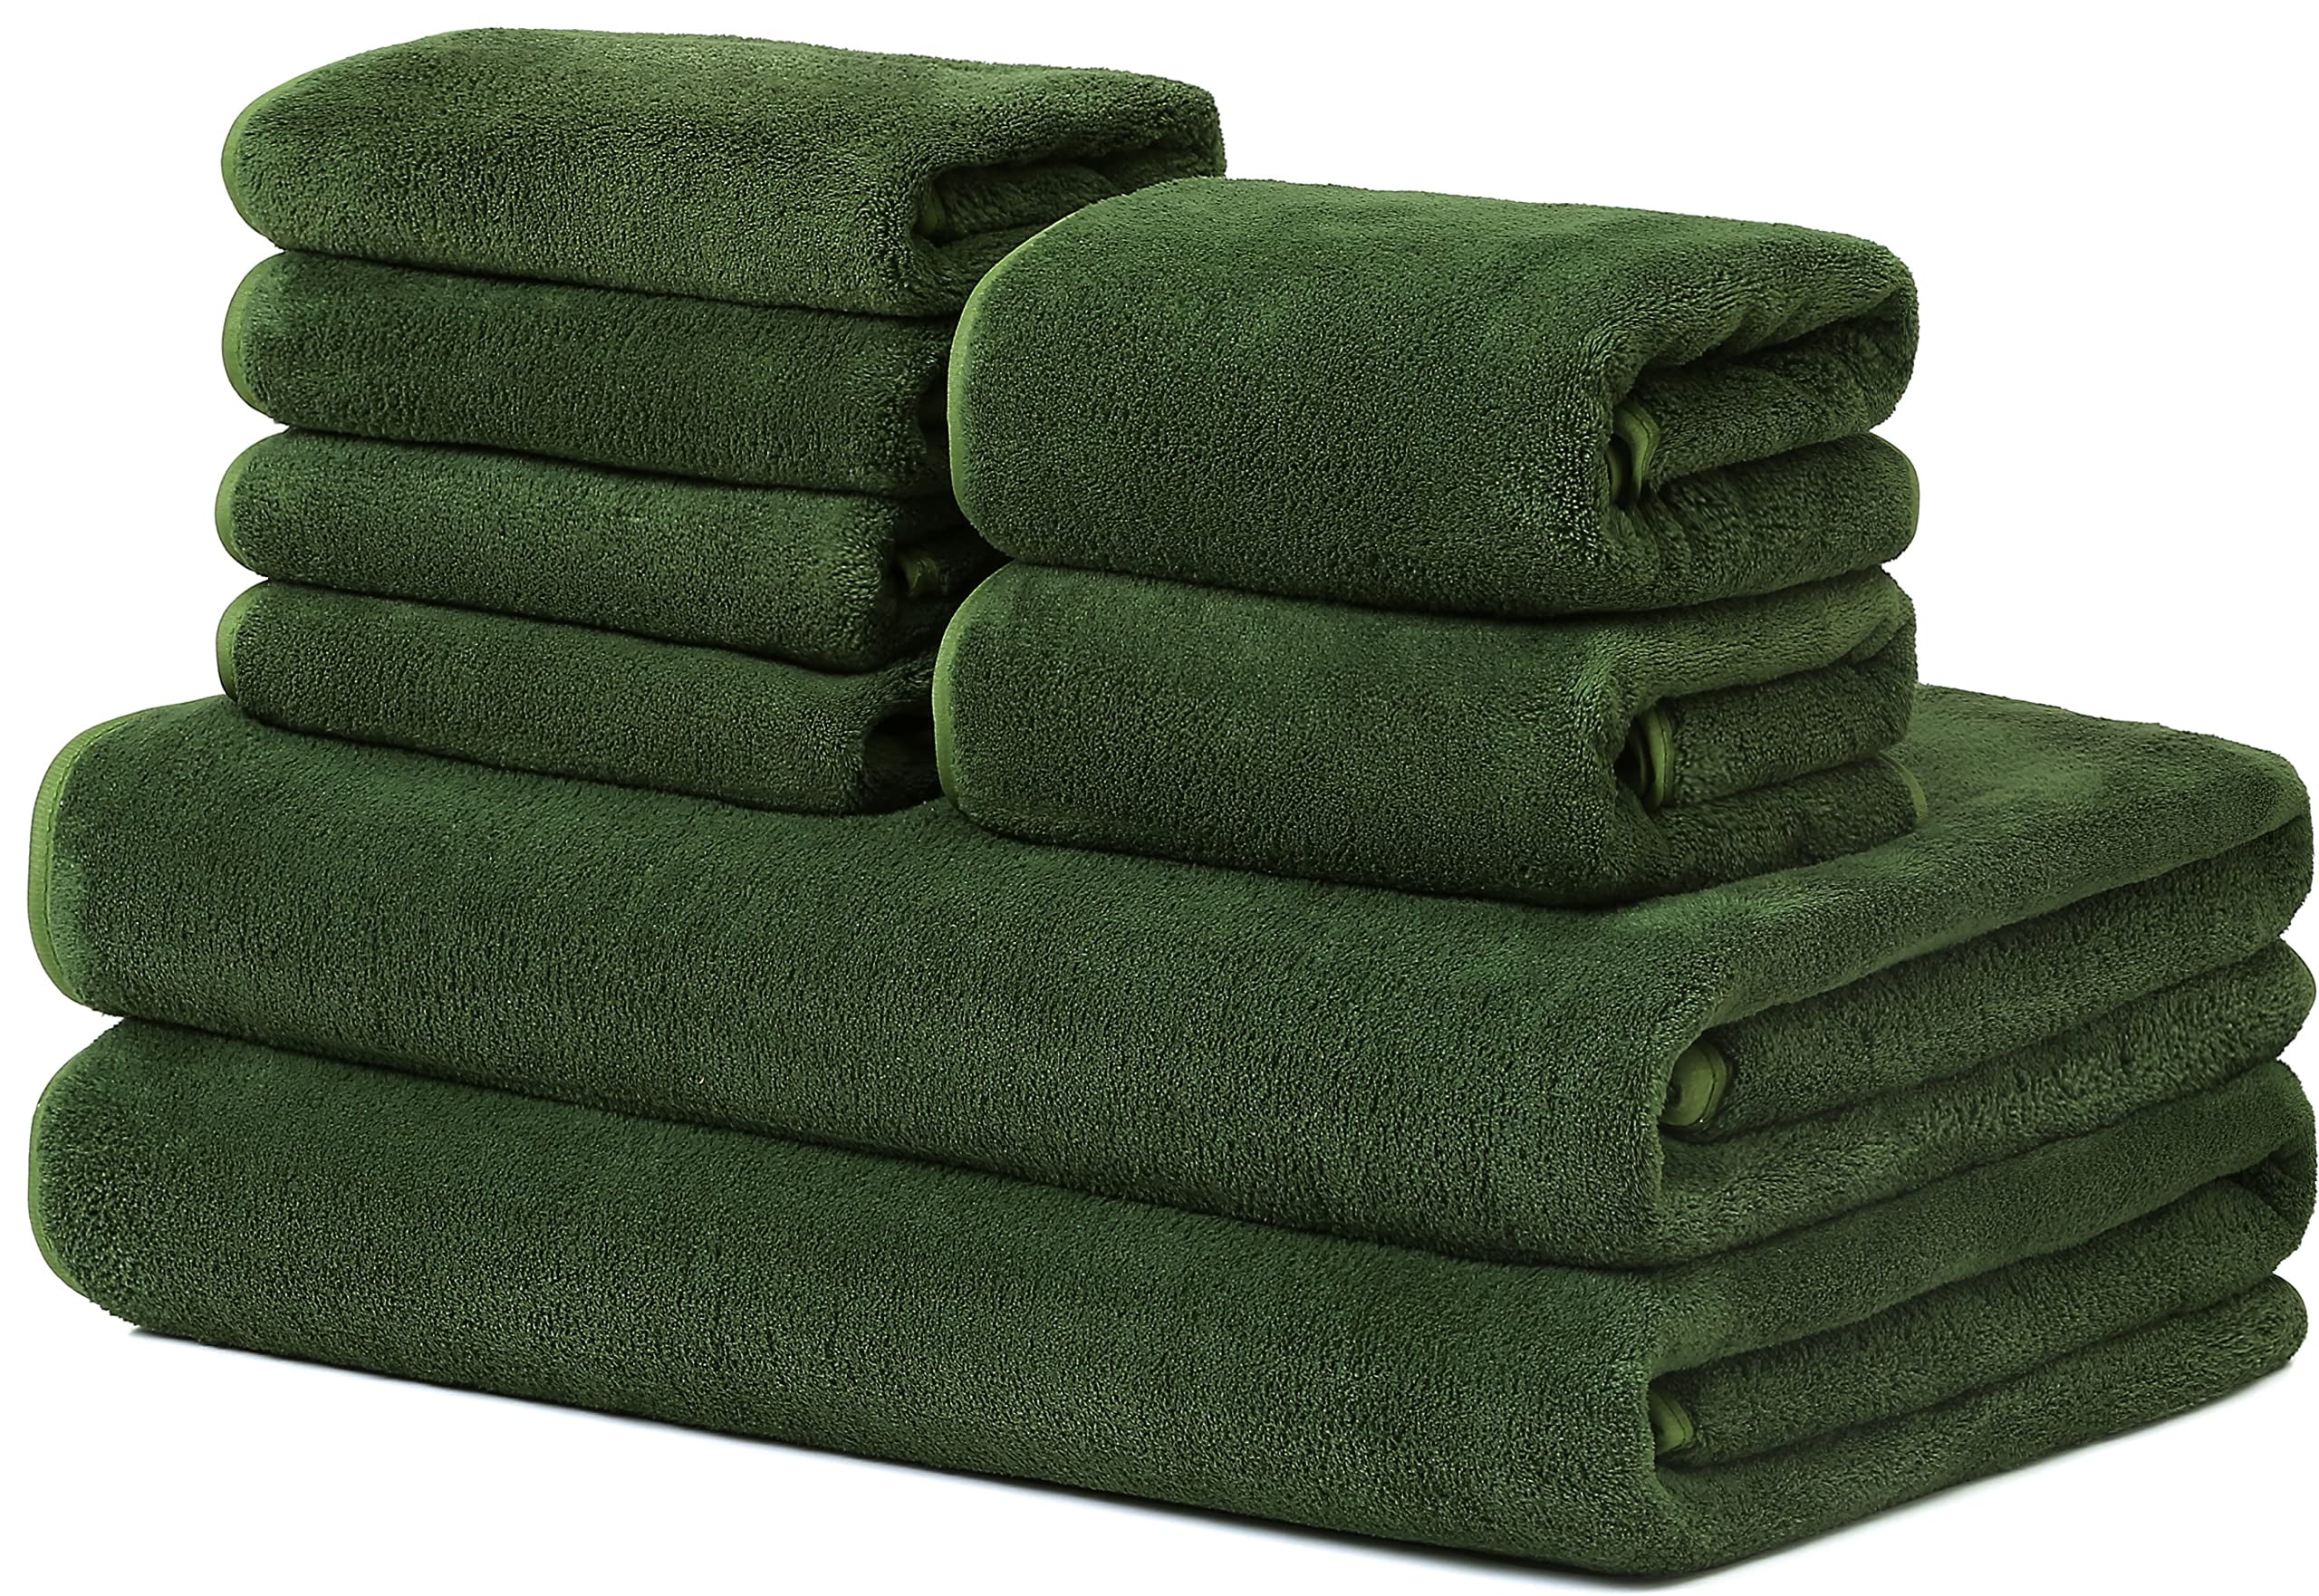 Abcelit Promotion!cotton Towels Soft Ultra Towels Hand Bath Thick Towels Home Textile Bathroom Accessories,Light Green